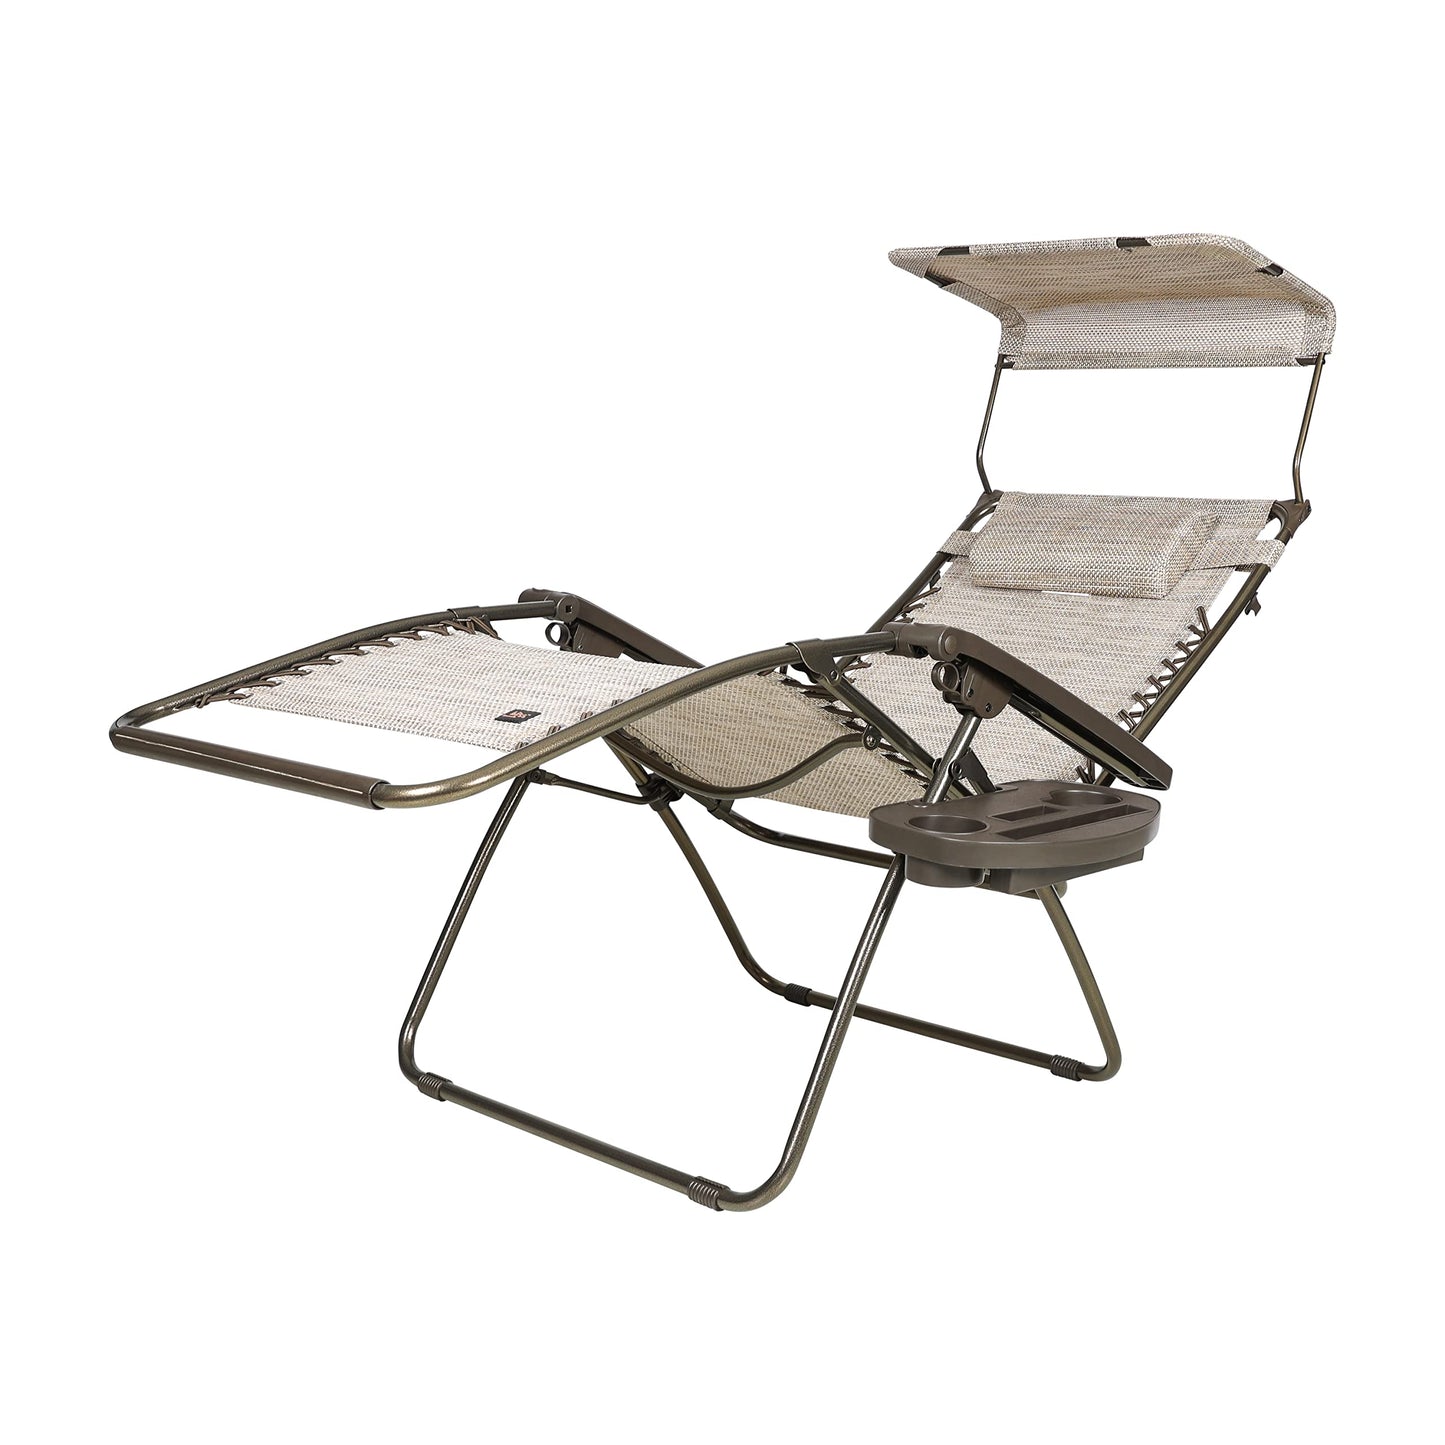 Bliss Hammocks GFC-452WSR Wide XL Zero Gravity w/Canopy, Pillow, & Drink Tray Folding Outdoor Lawn, Deck, Patio Adjustable Lounge Chair, 360 lbs. Capacity, Weather and Rust Resistant, 30-Inch, SAND Single Pack